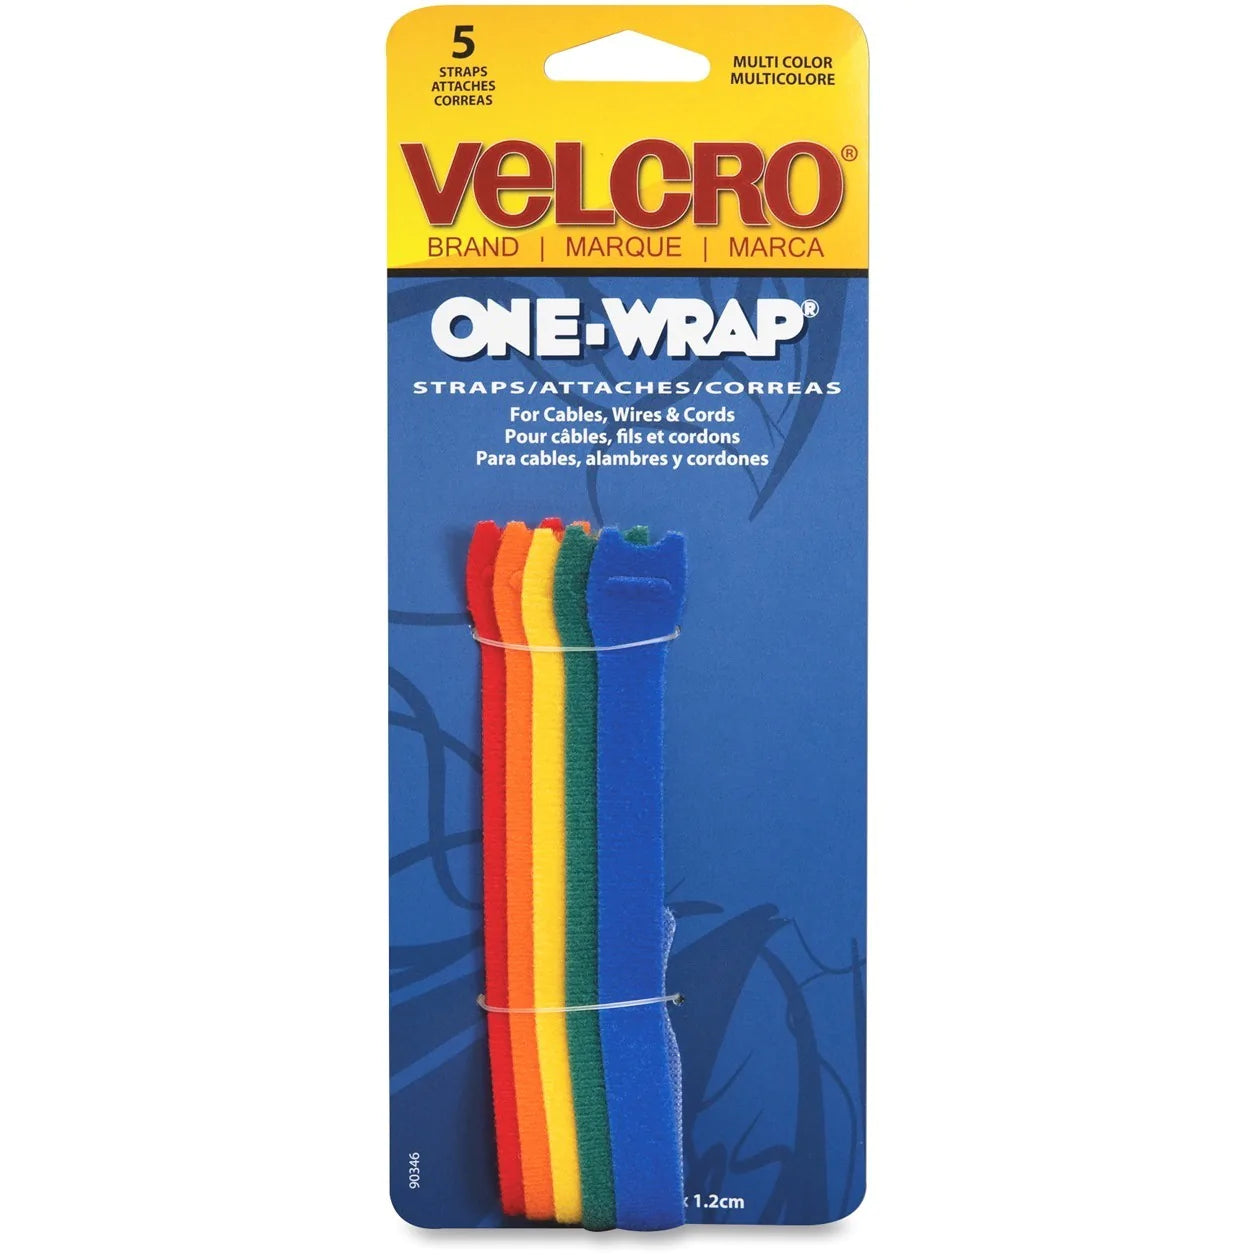 Velcro Brand One-Wrap Straps 20.3 x 1.2 cm - Pack of 5